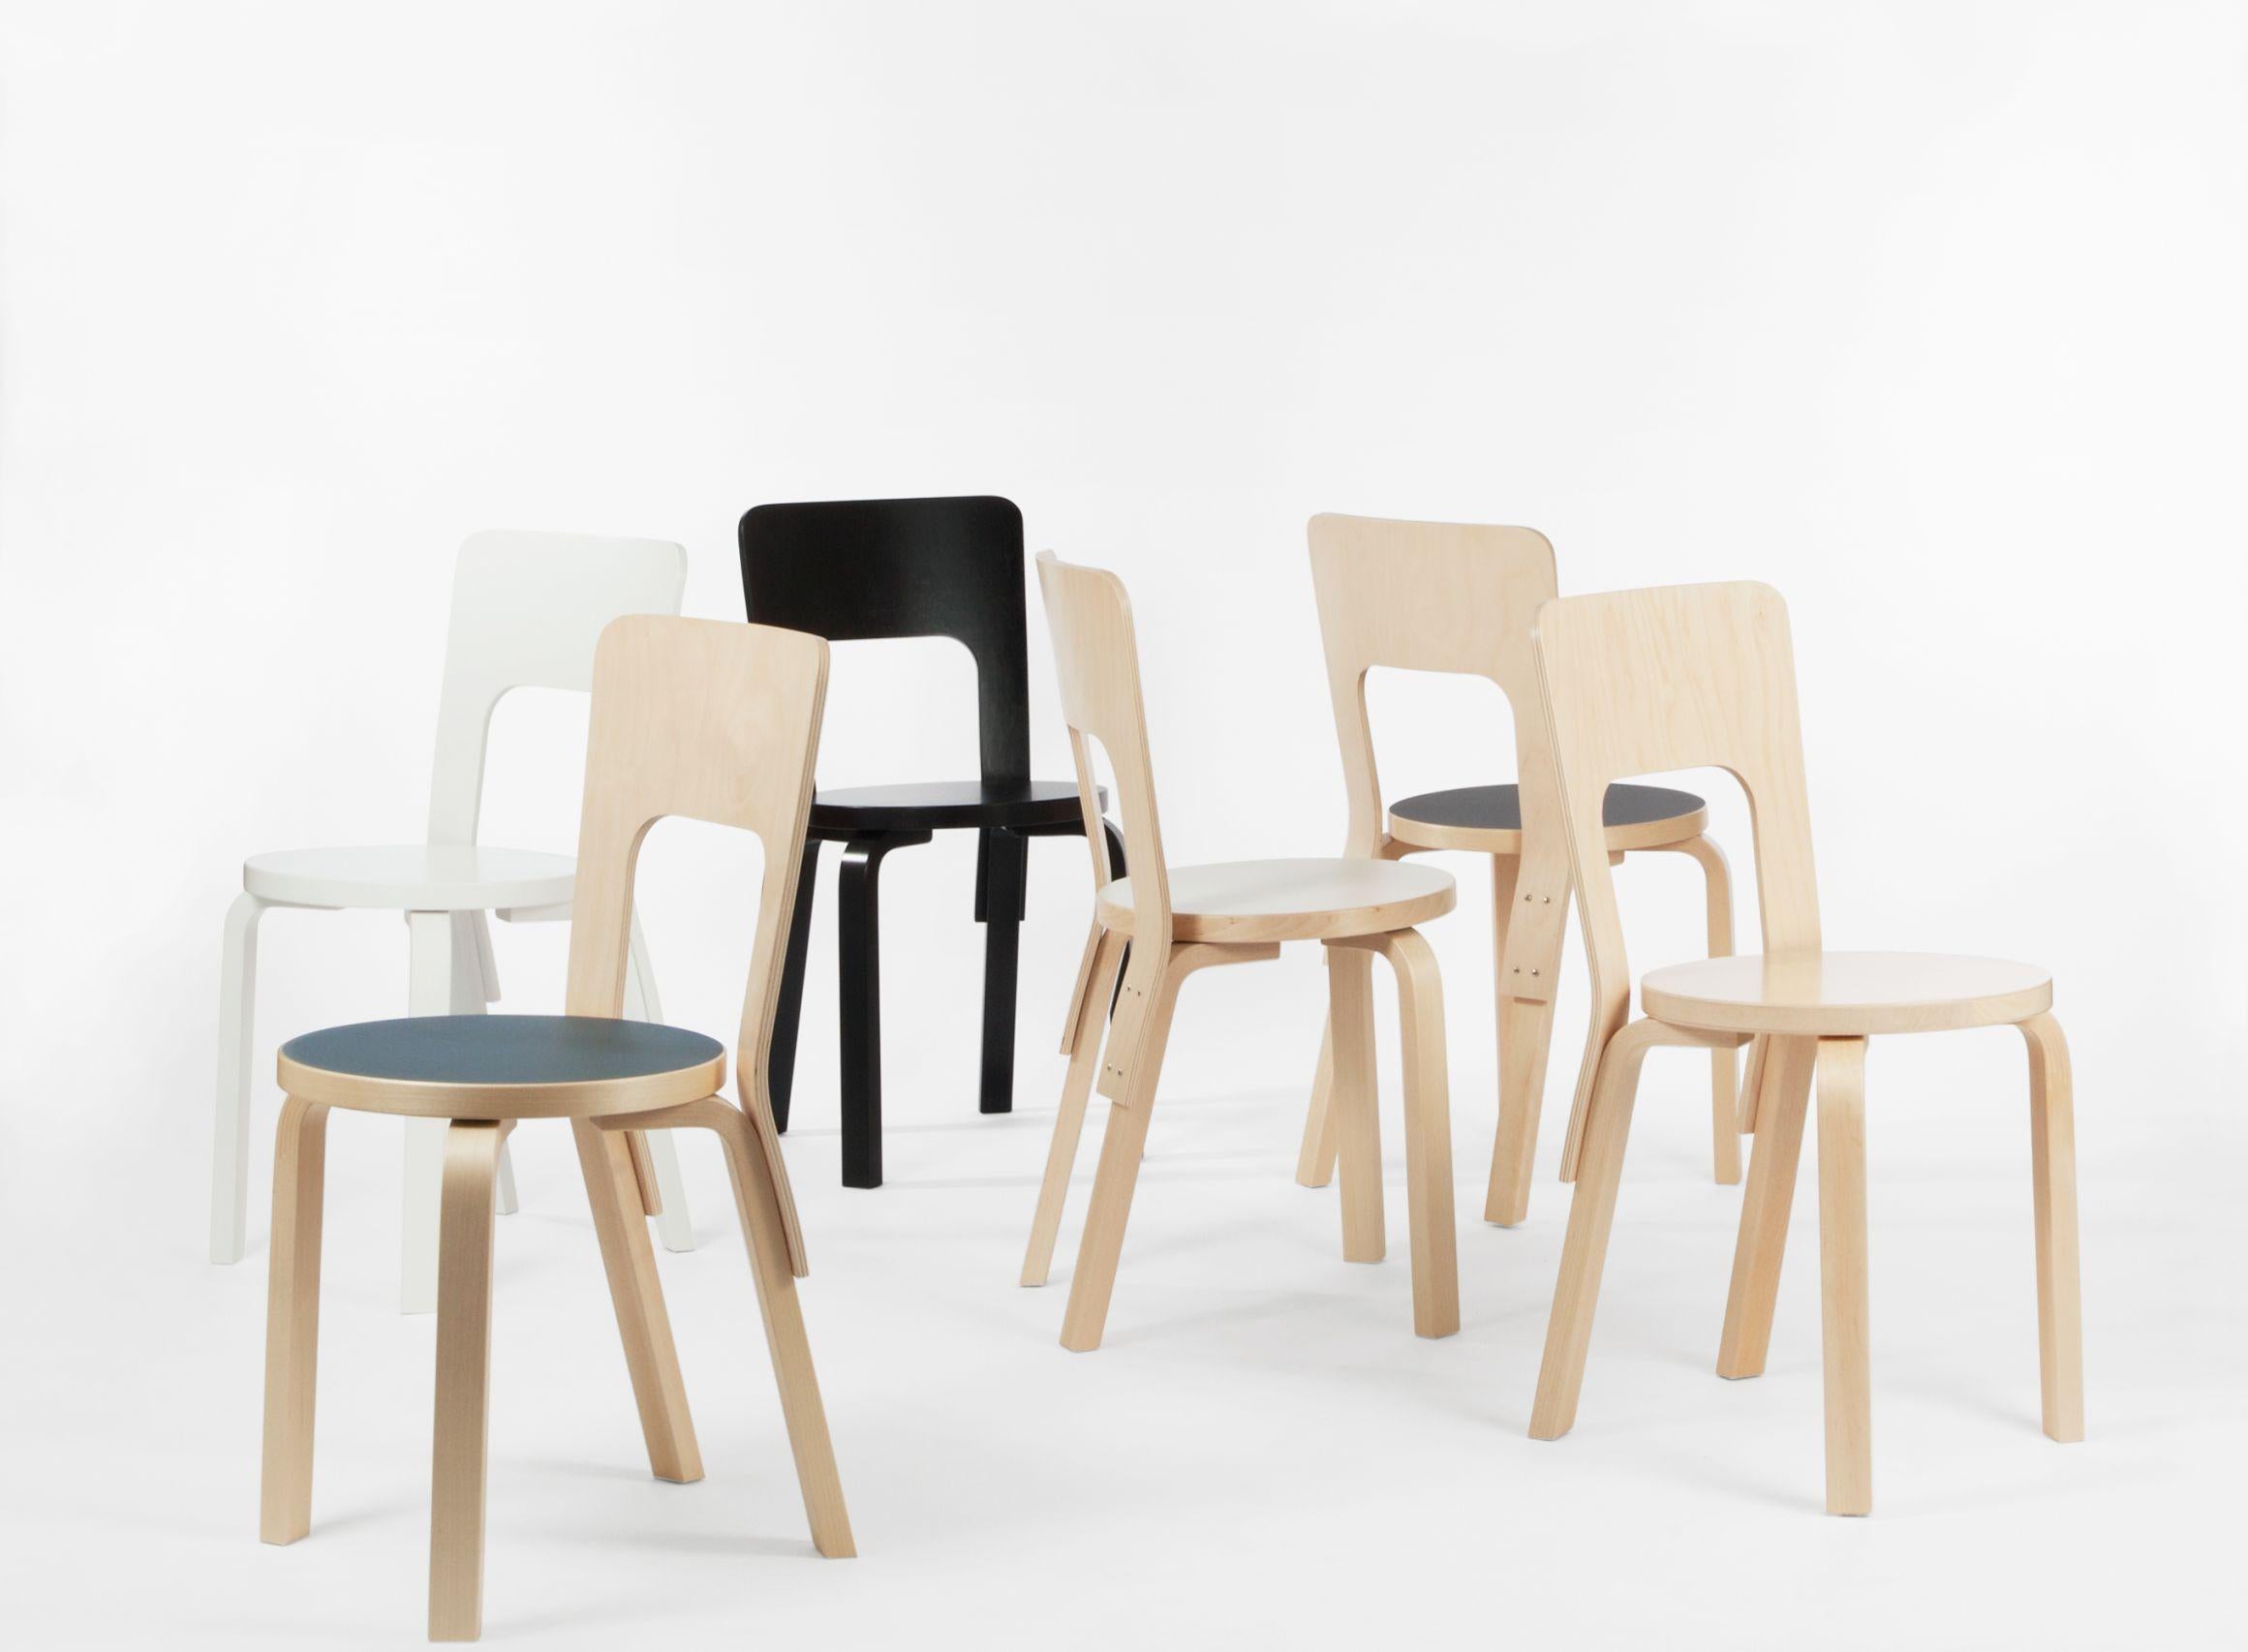 Authentic chair 66 in lacquered birch with linoleum seat by Alvar Aalto & Artek. Chair 66 is a universal wooden chair in the tradition of classic kitchen and café chairs; it's visible, additive construction logic is full of character and pleasing to